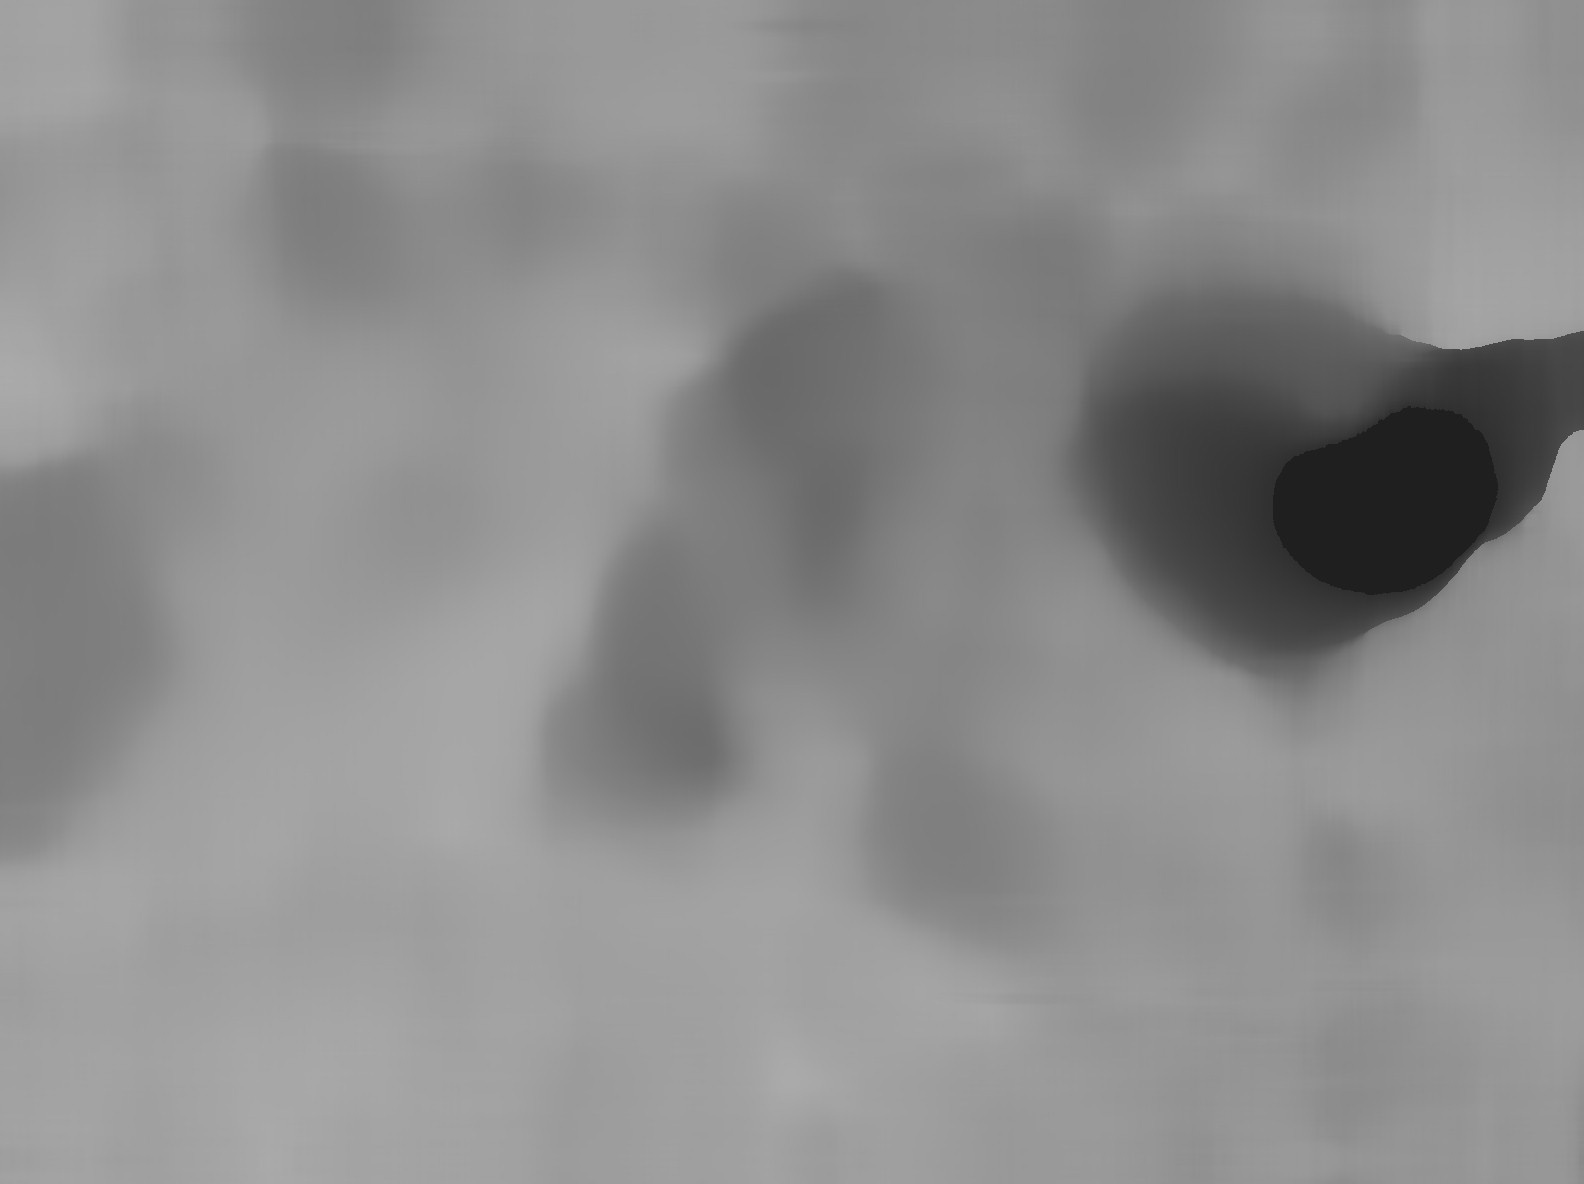 Nasa's Mars rover Curiosity acquired this image using its Mars Hand Lens Imager (MAHLI) on Sol 2559